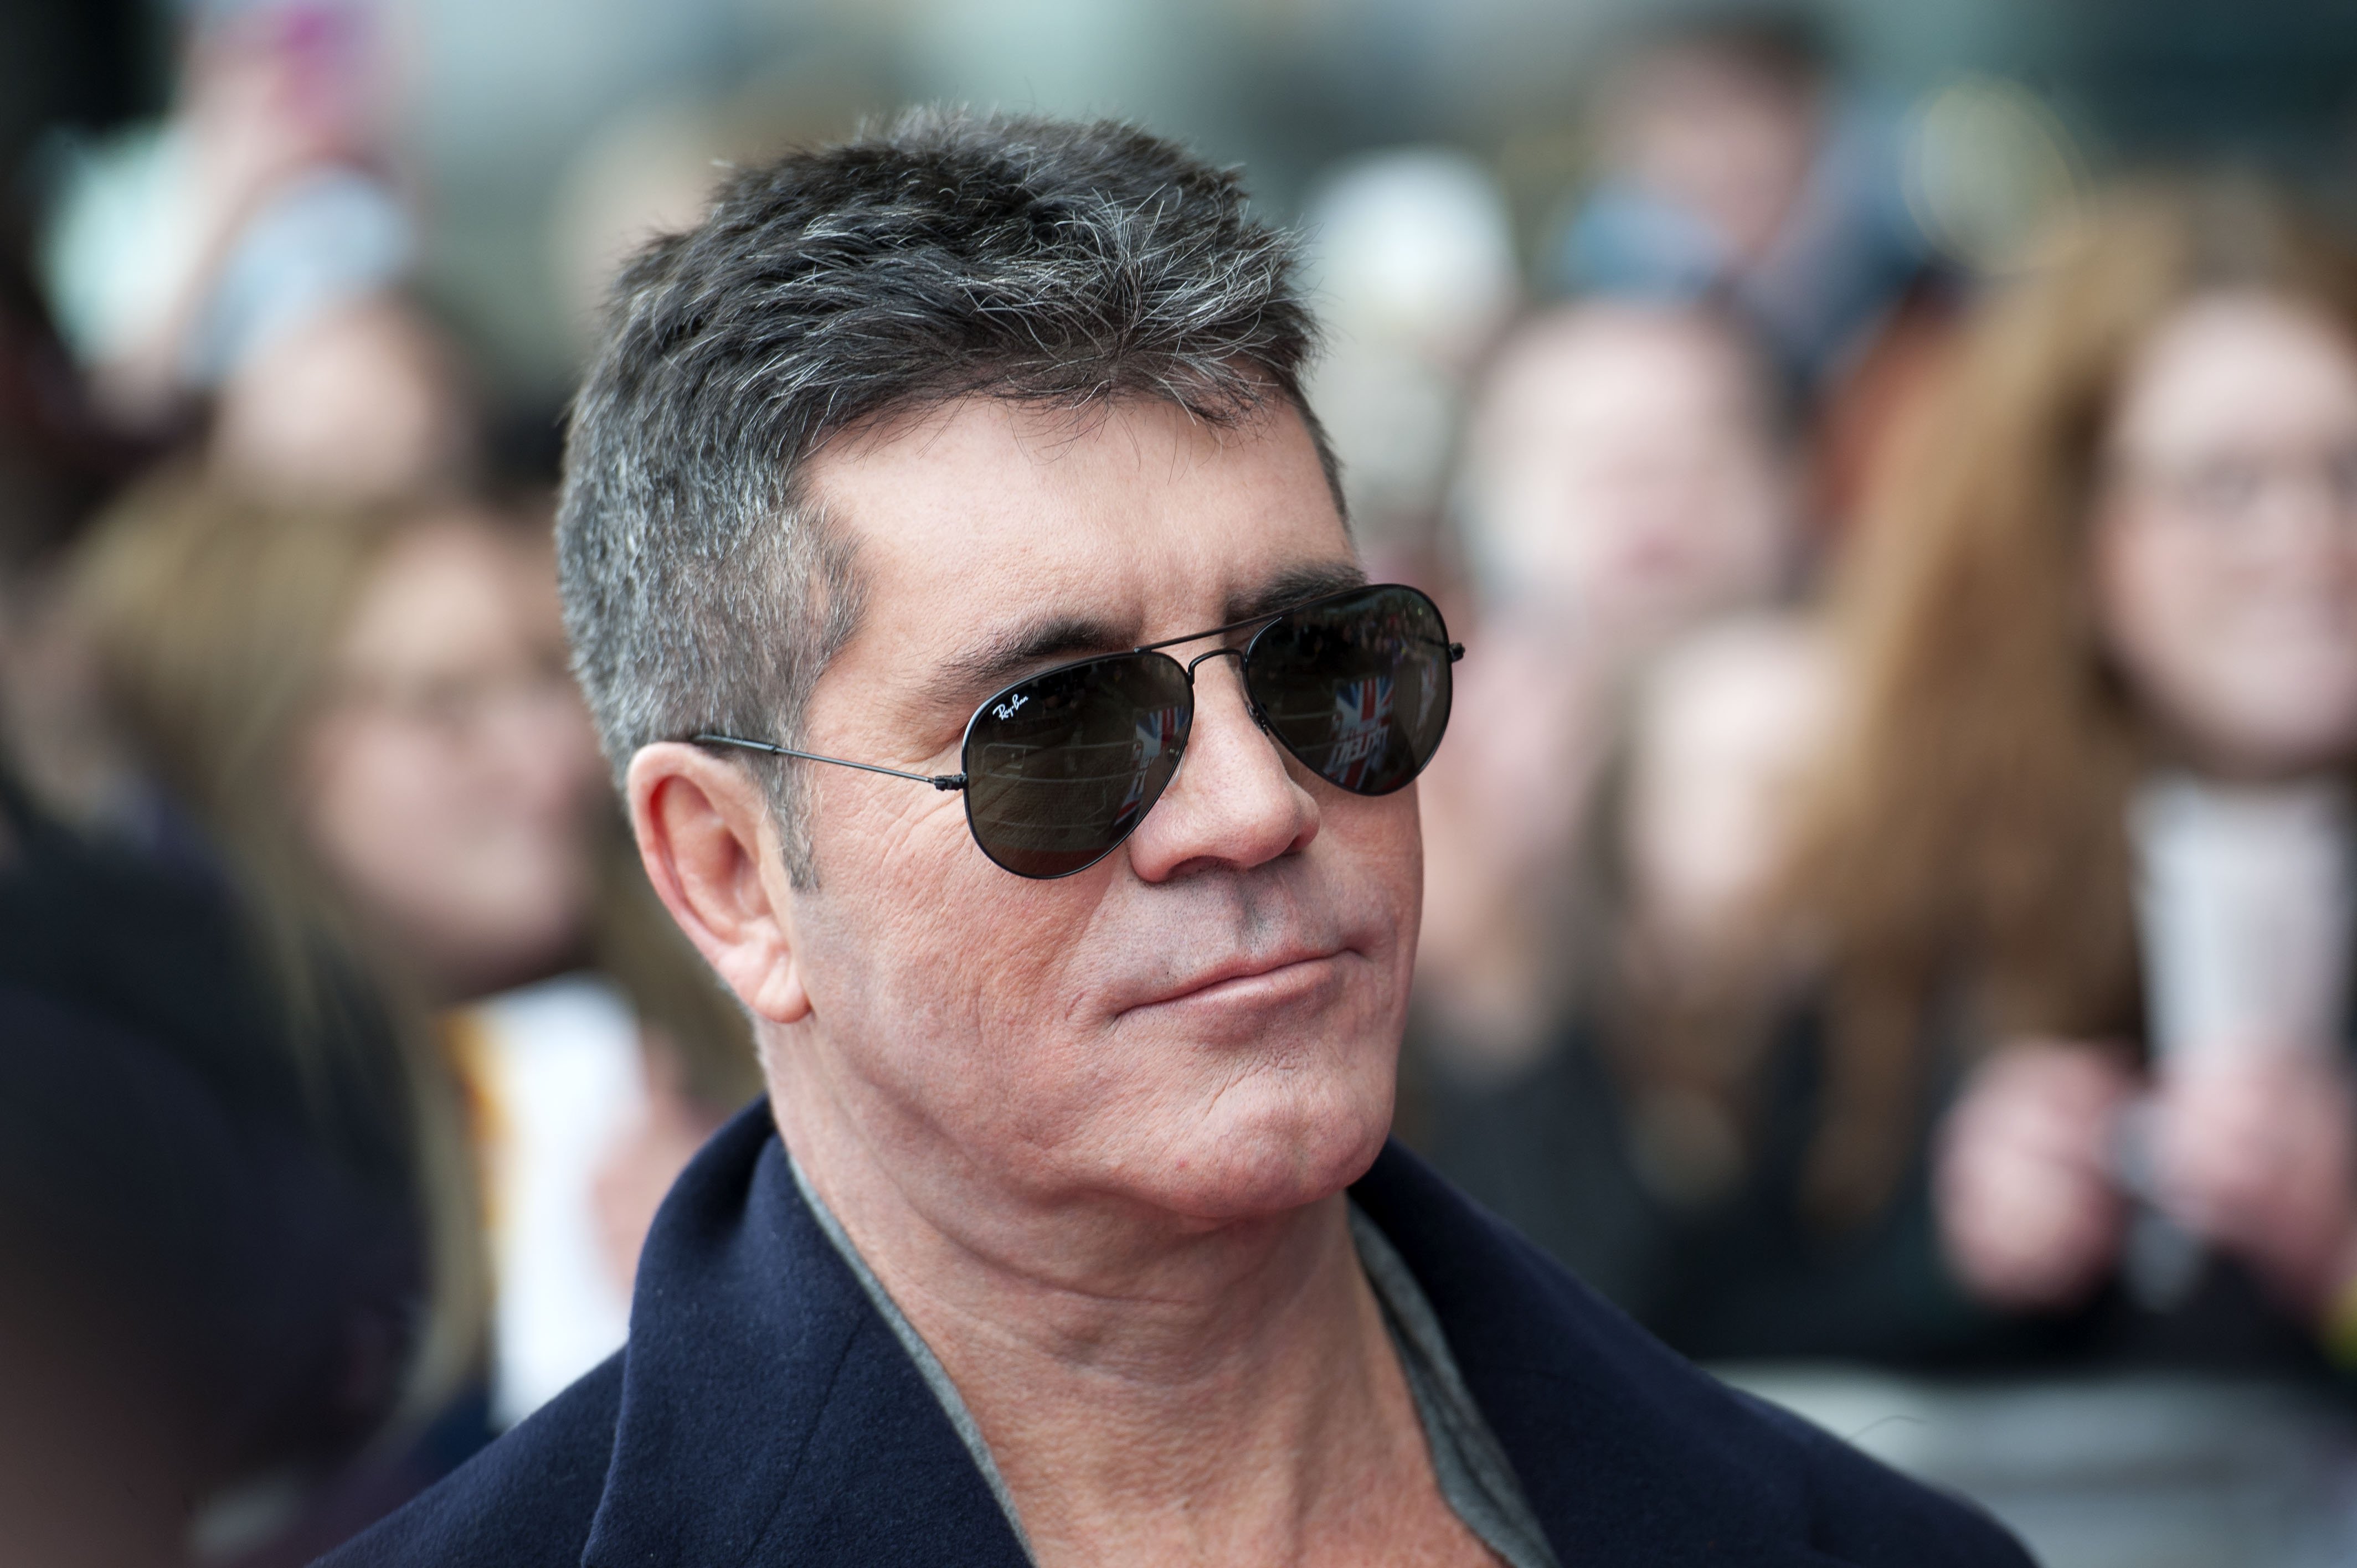 Simon Cowell arrives at the Britain's Got Talent Cardiff auditions on January 23, 2014, in Cardiff, Wales. | Source: Getty Images.